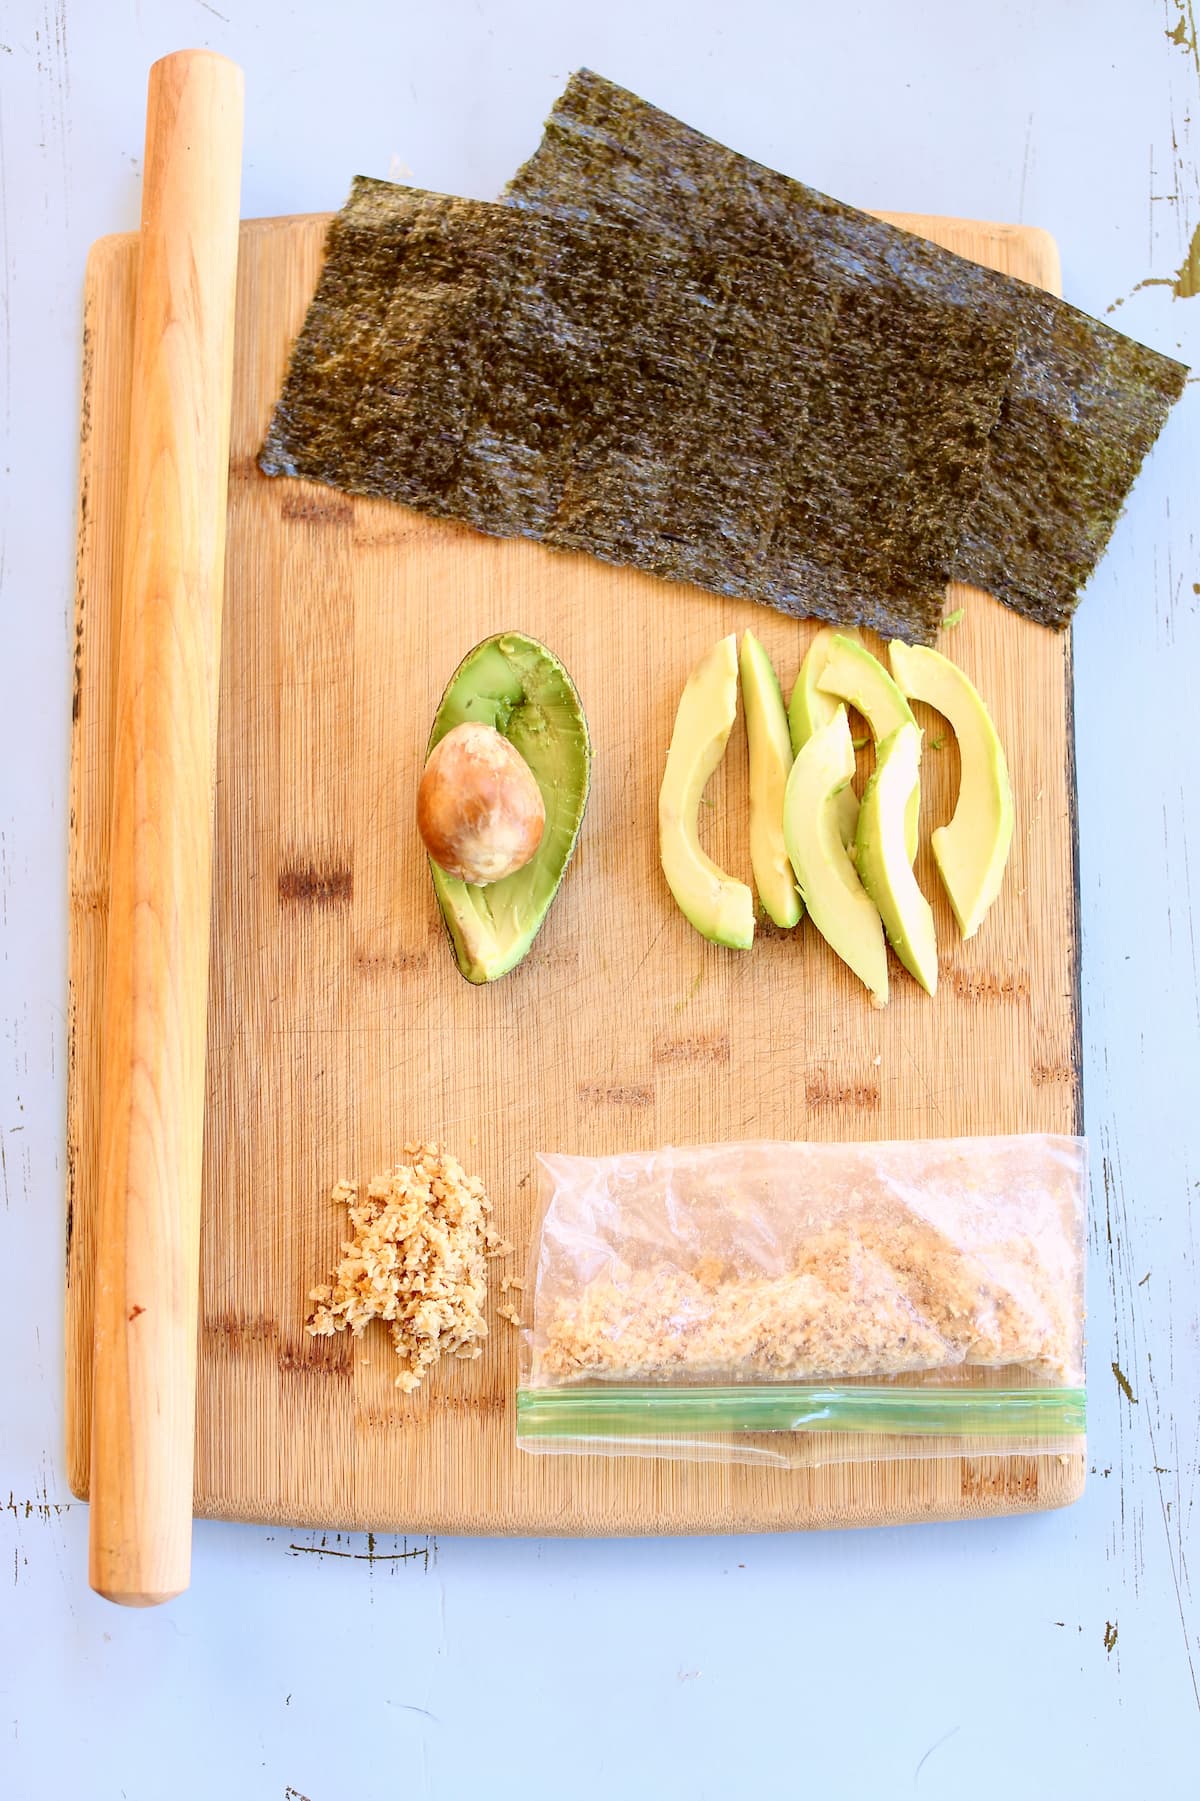 Nori sheets, avocado, and other ingredients for a sushi roll on a cutting board.